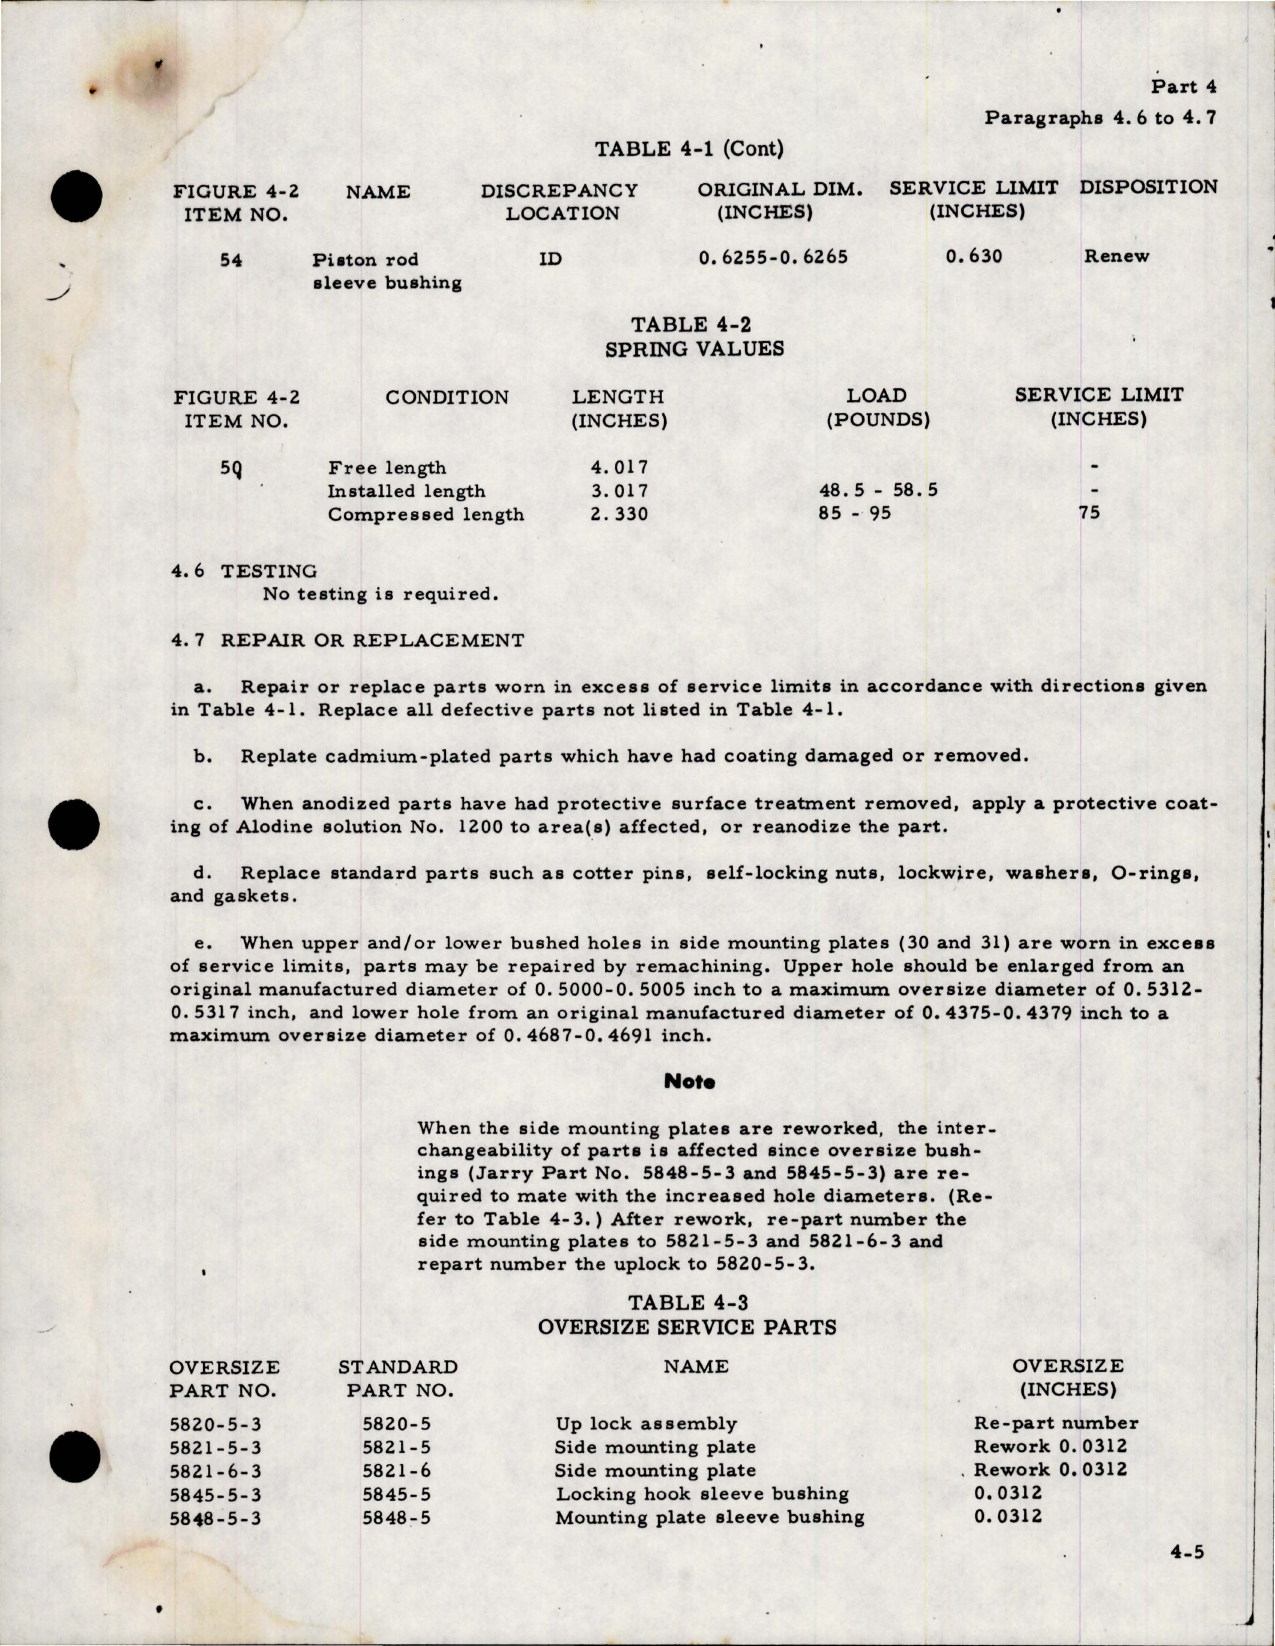 Sample page 5 from AirCorps Library document: Main Landing Gear Up Lock Assembly